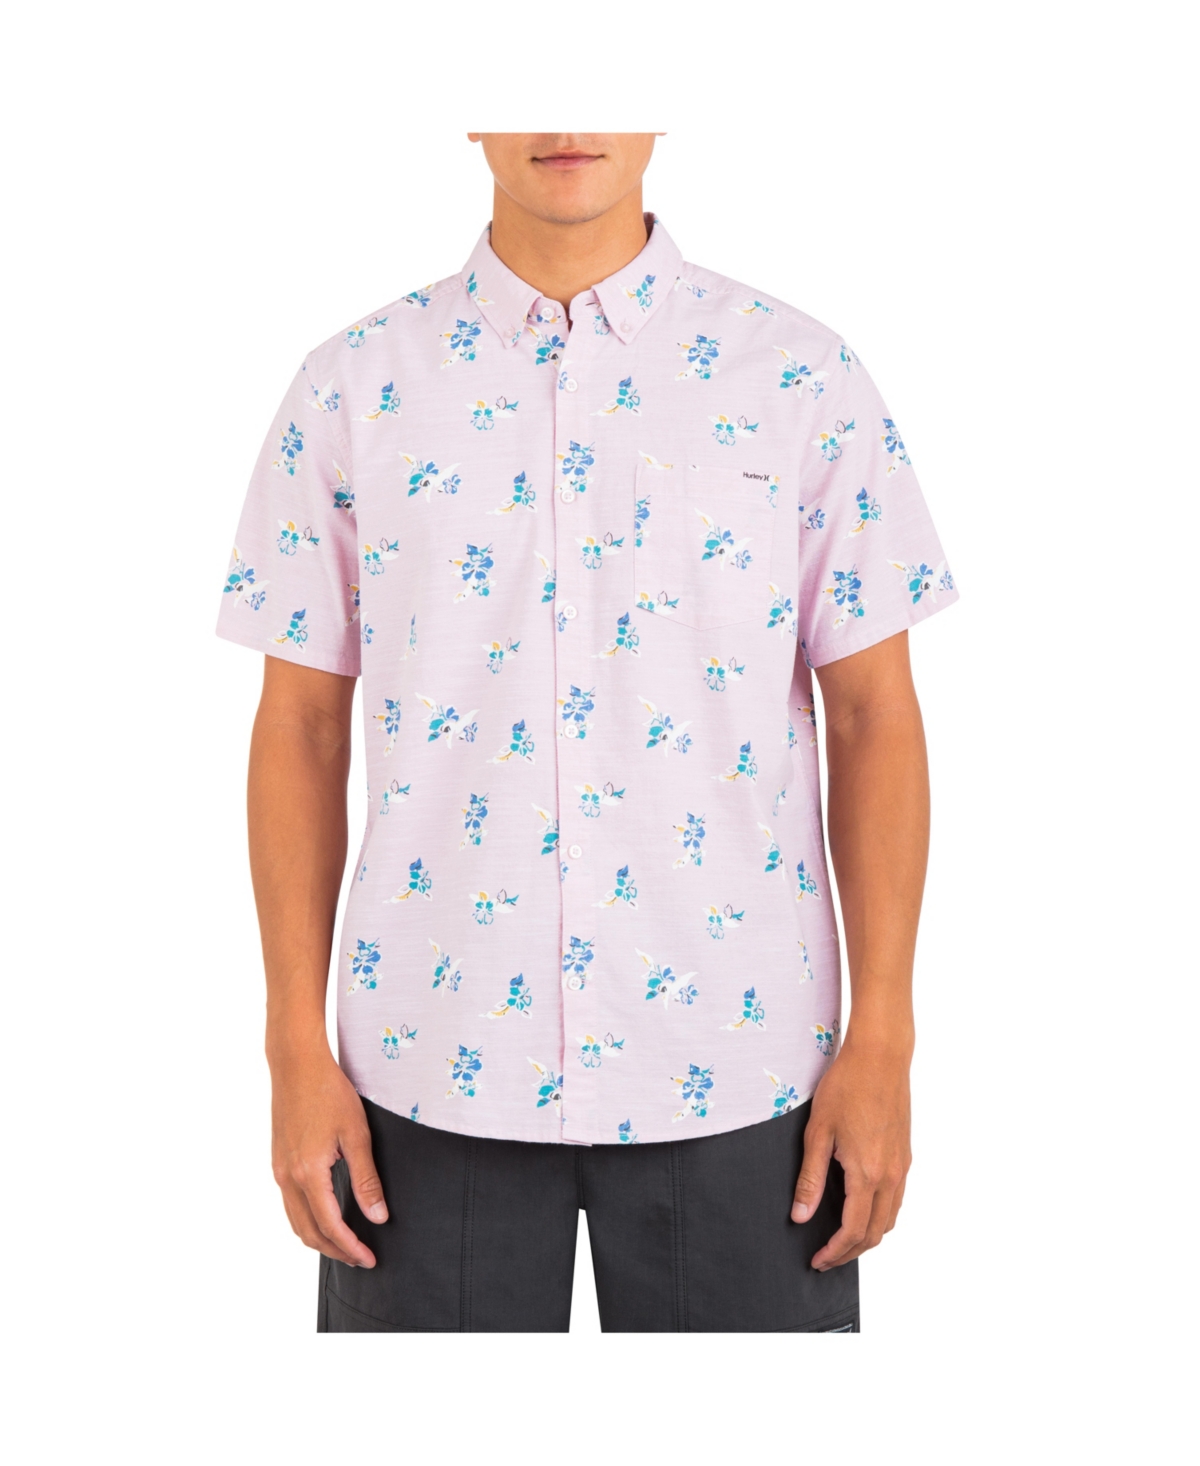 Men's One and Only Stretch Short Sleeve Shirt - Flamingo